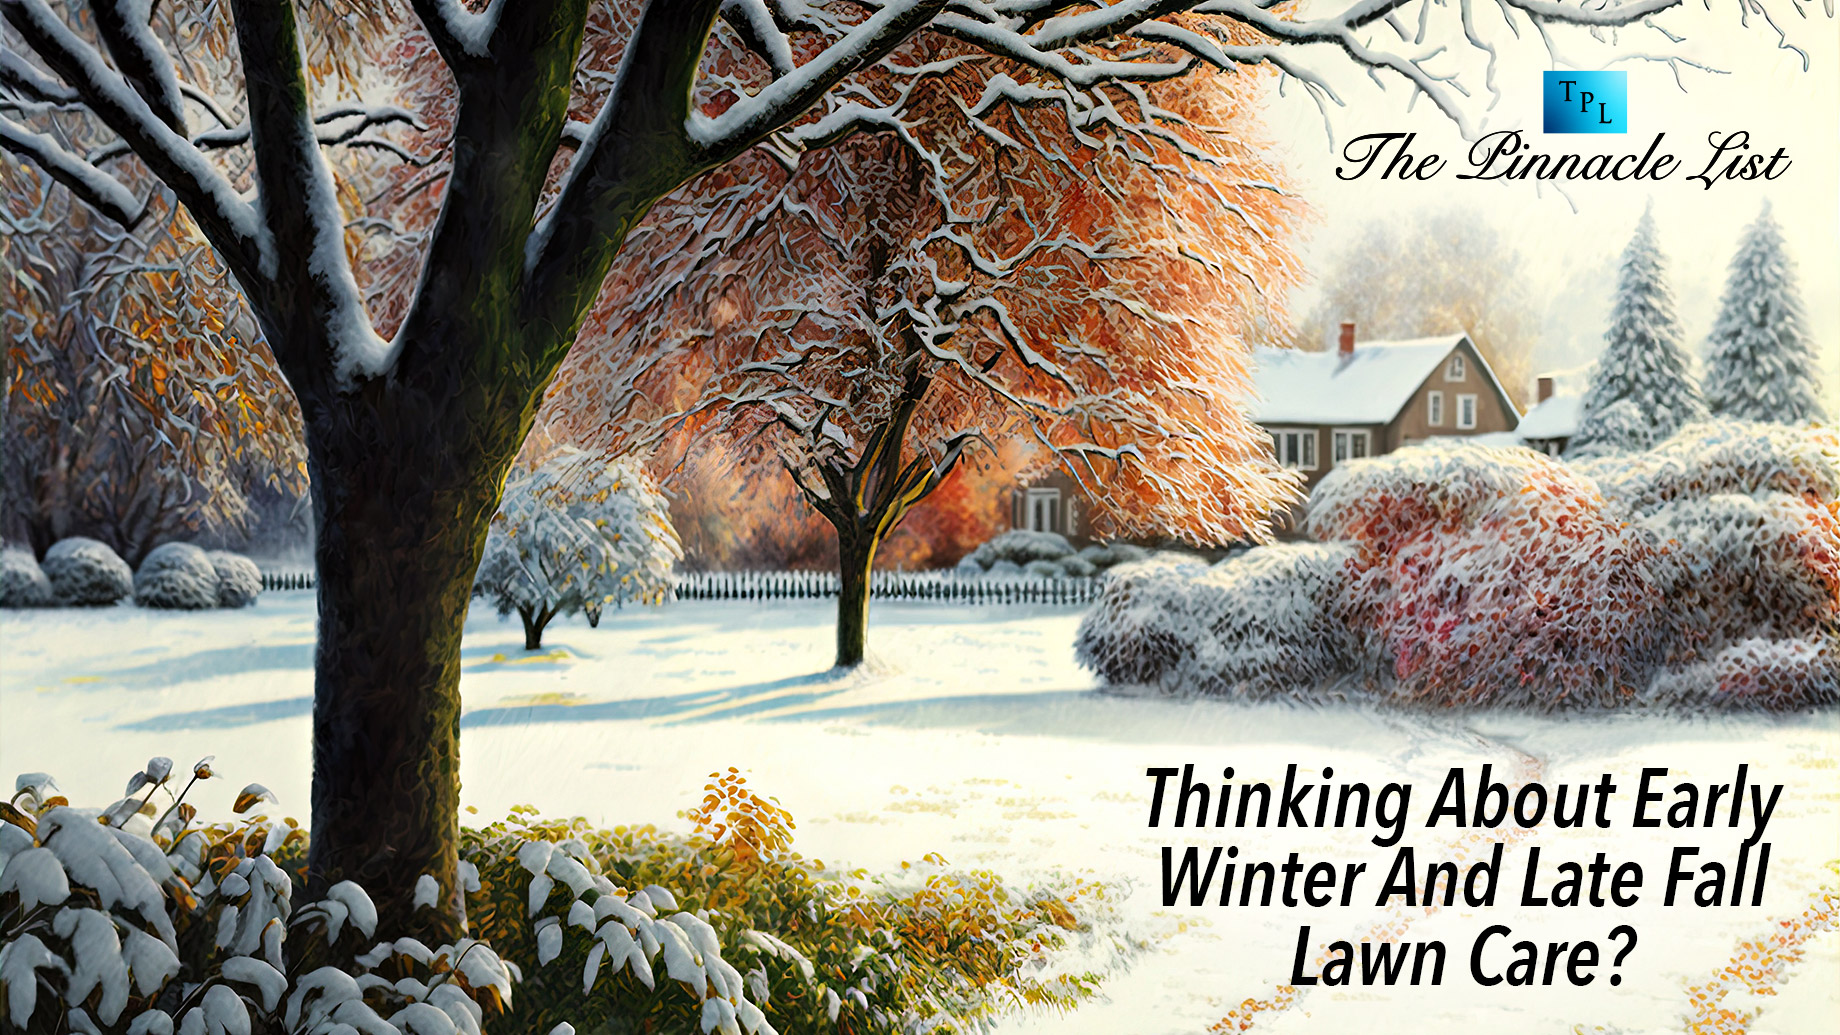 Thinking About Early Winter And Late Fall Lawn Care?